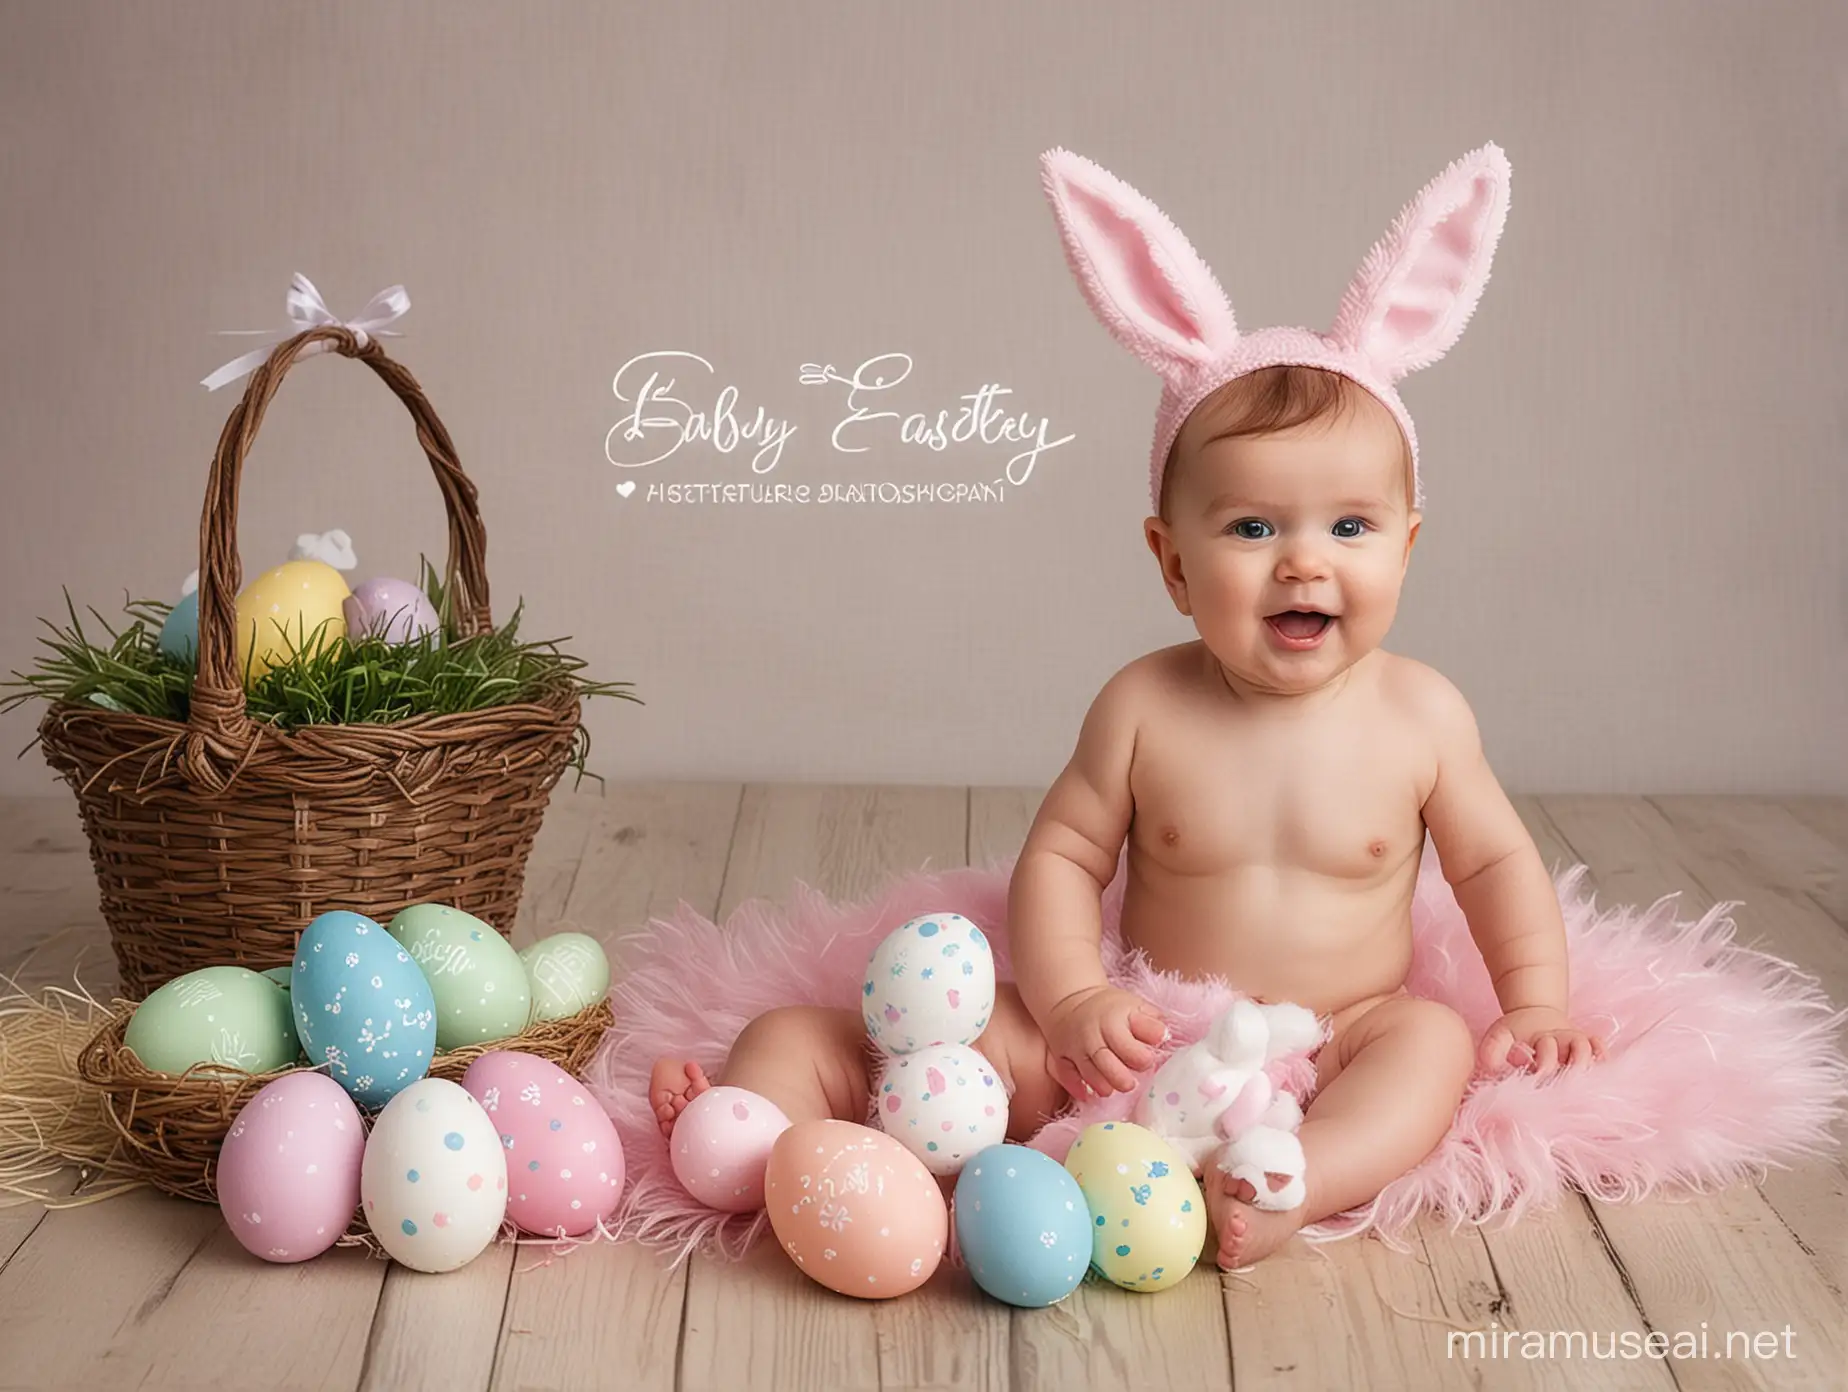 Adorable Babys First Easter Photo Shoot with Colorful Eggs and Bunny Ears